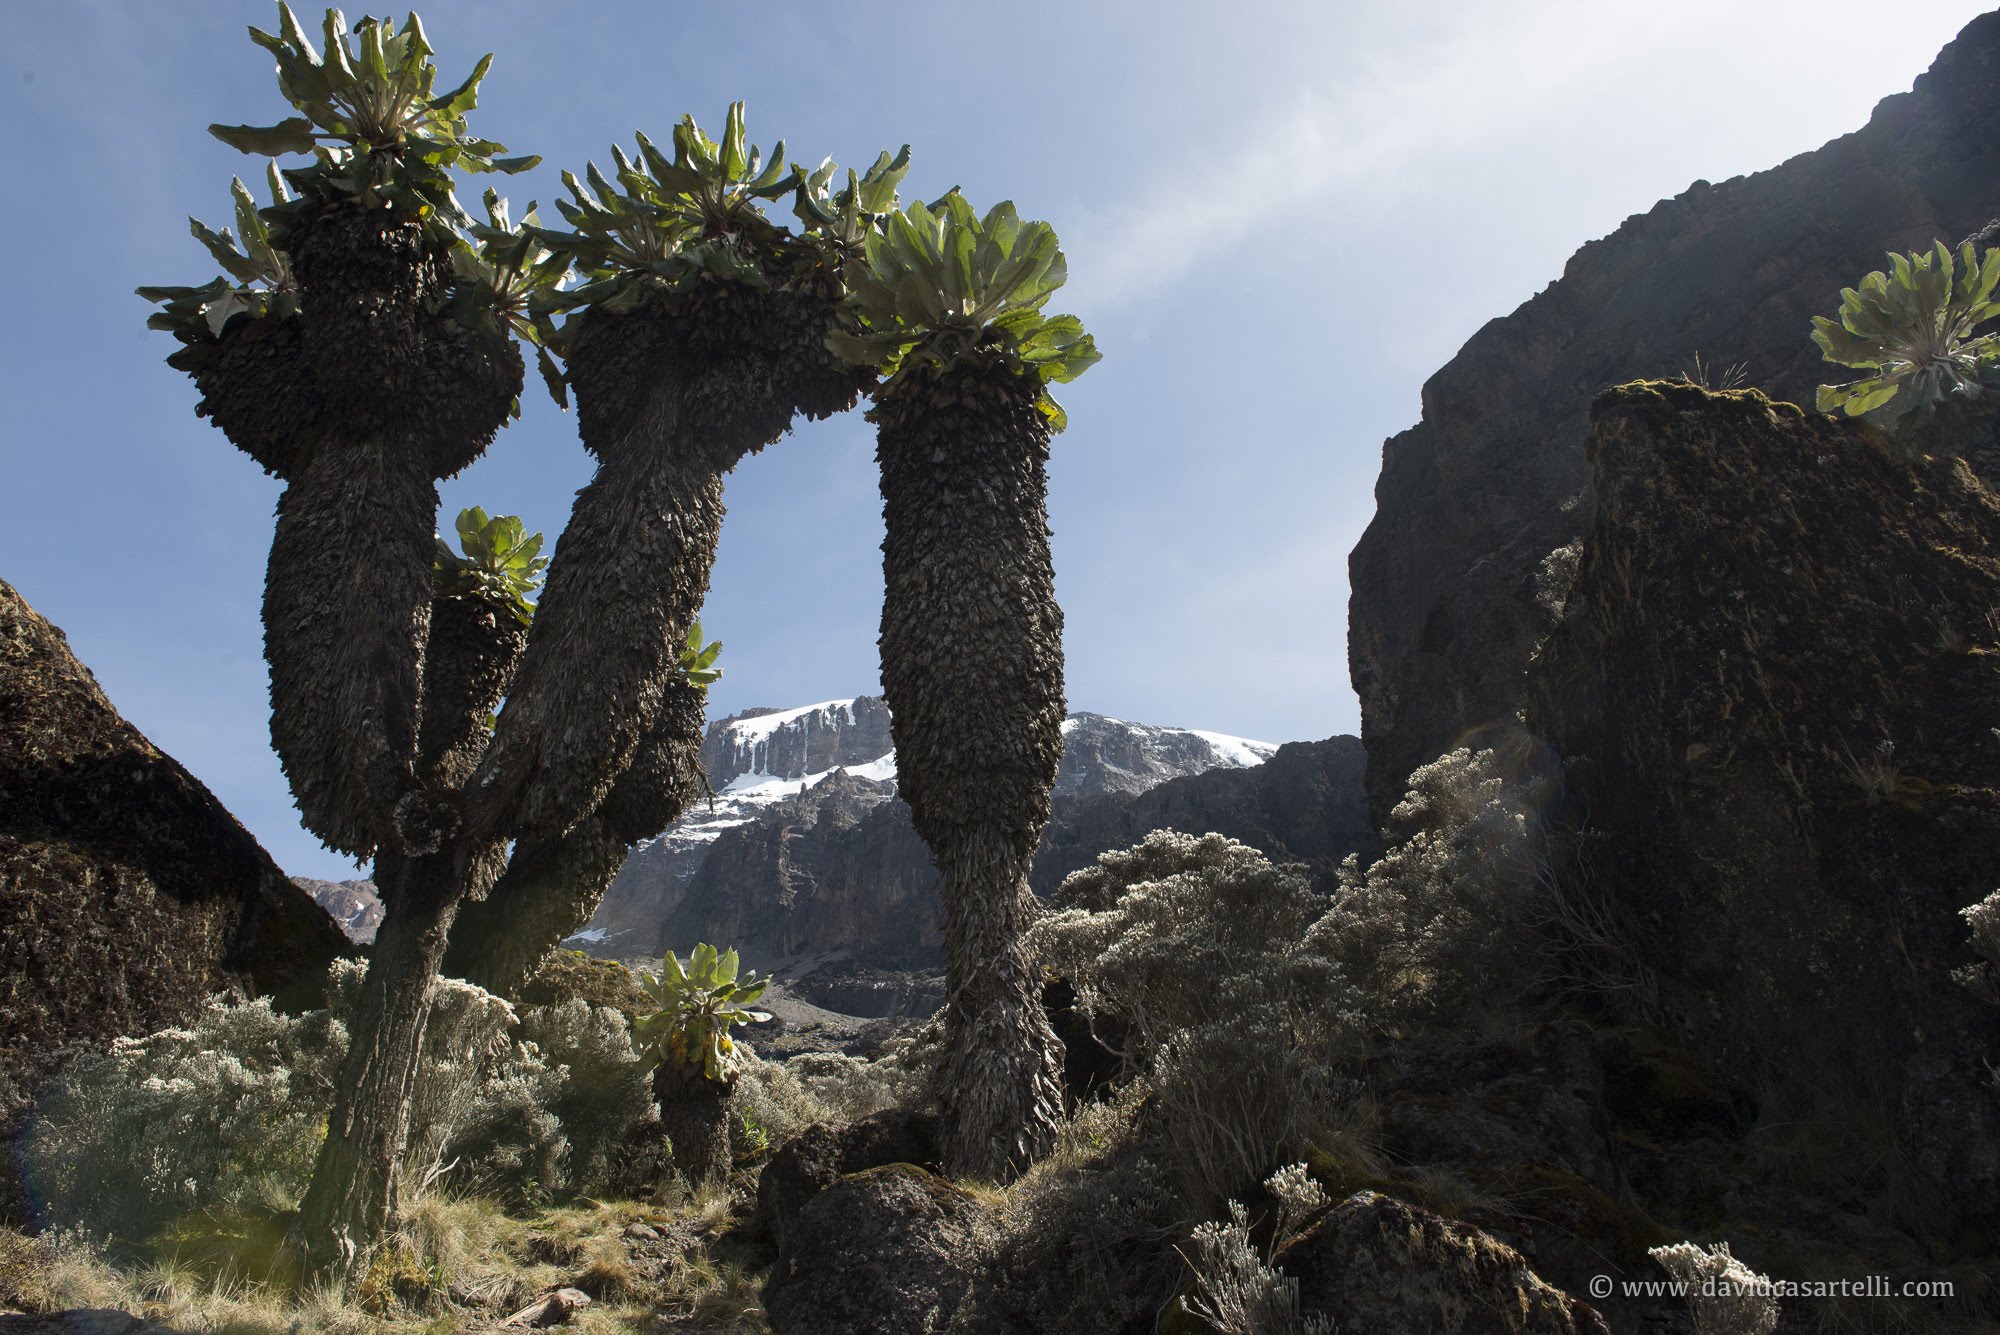 Image Slider No: 2 Kilimanjaro Routes - Which one is Best Kilimanjaro Route?